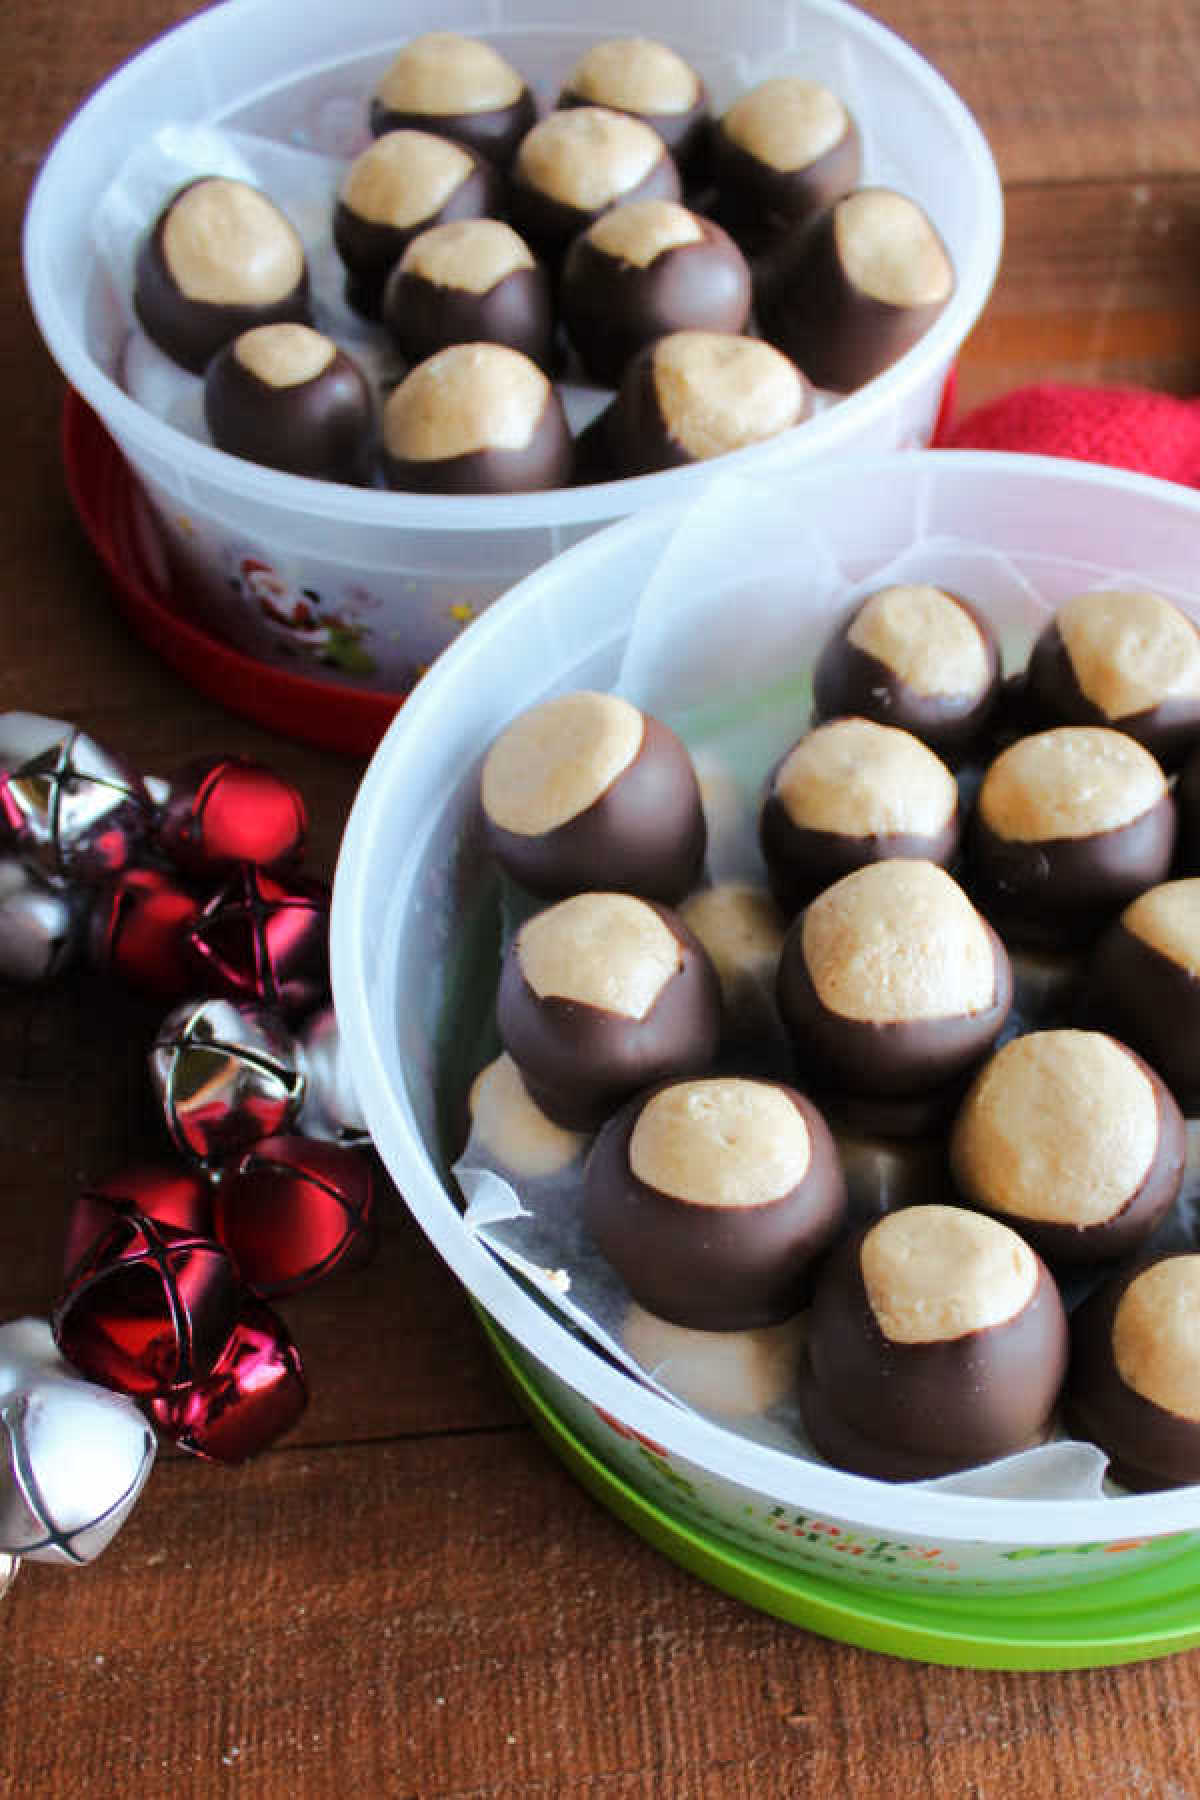 plastic containers filled with homemade peanut butter buckeyes for gifting.